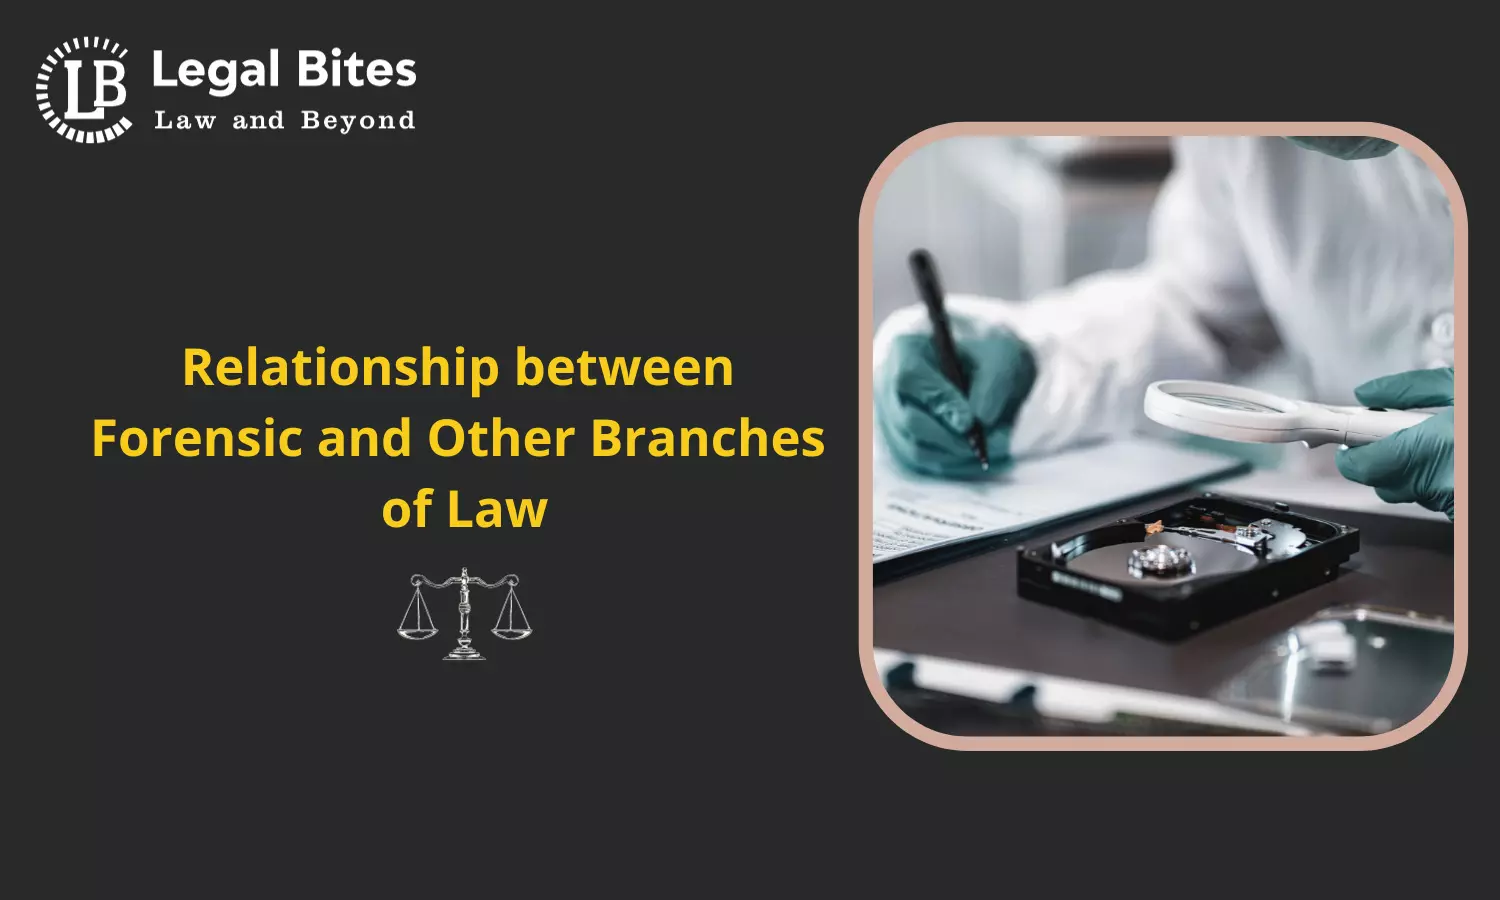 Relationship between Forensic and Other Branches of Law